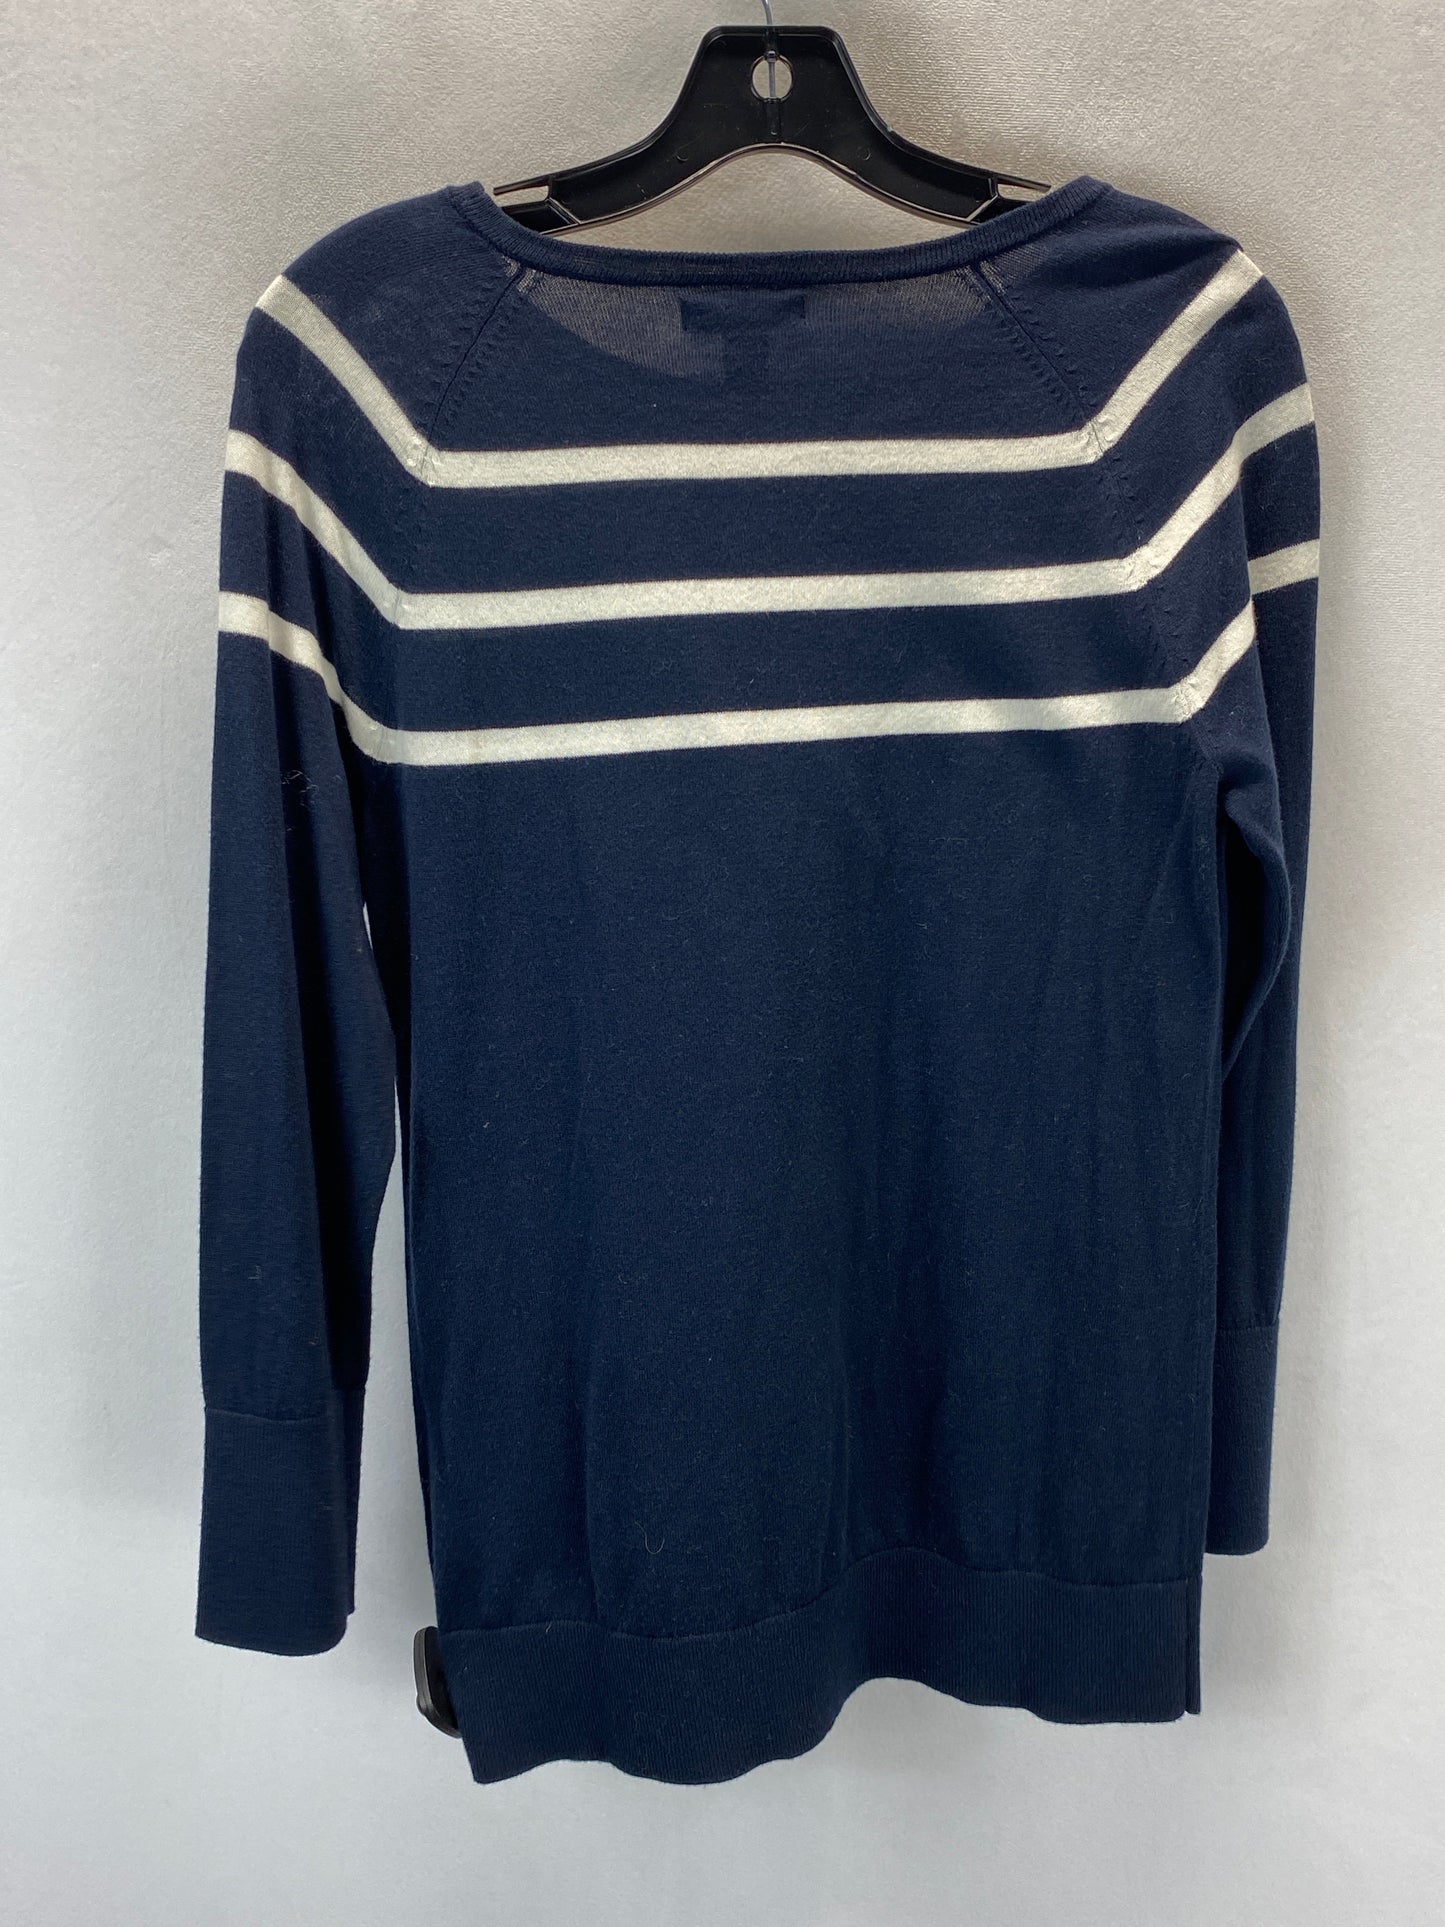 Sweater By Nautica  Size: S